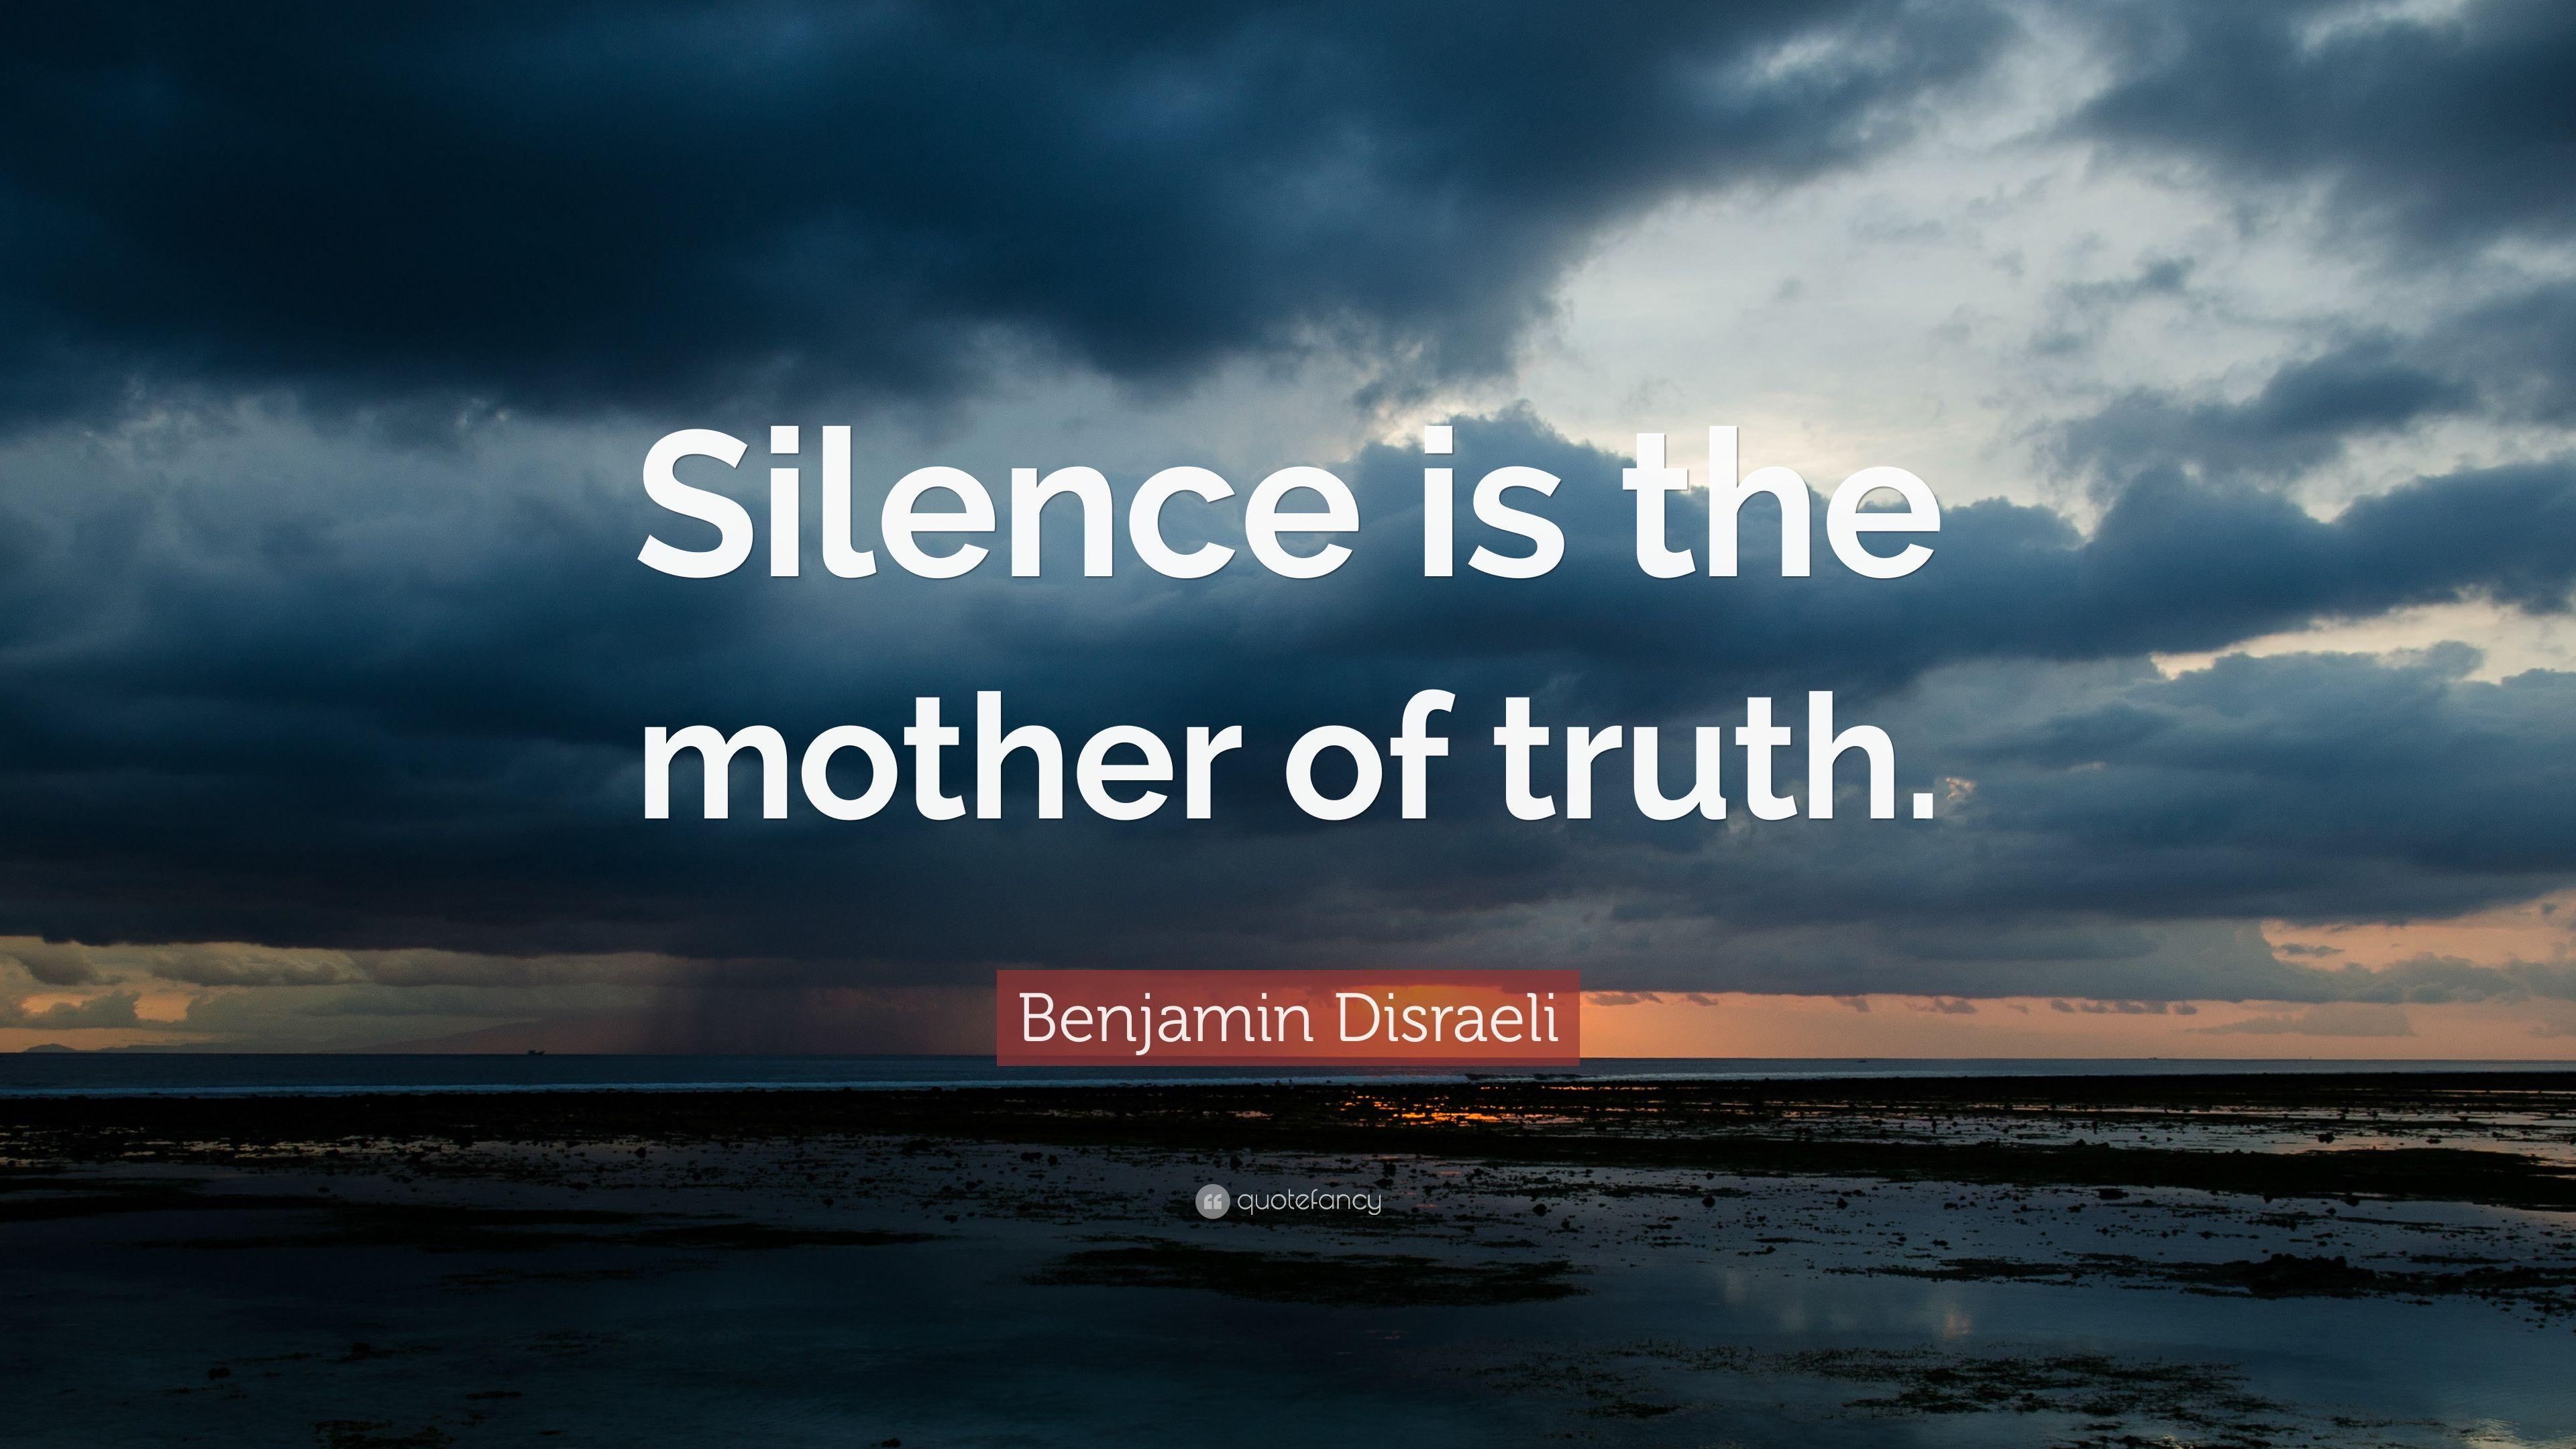 Benjamin Disraeli Quote: “Silence is the mother of truth.” 12